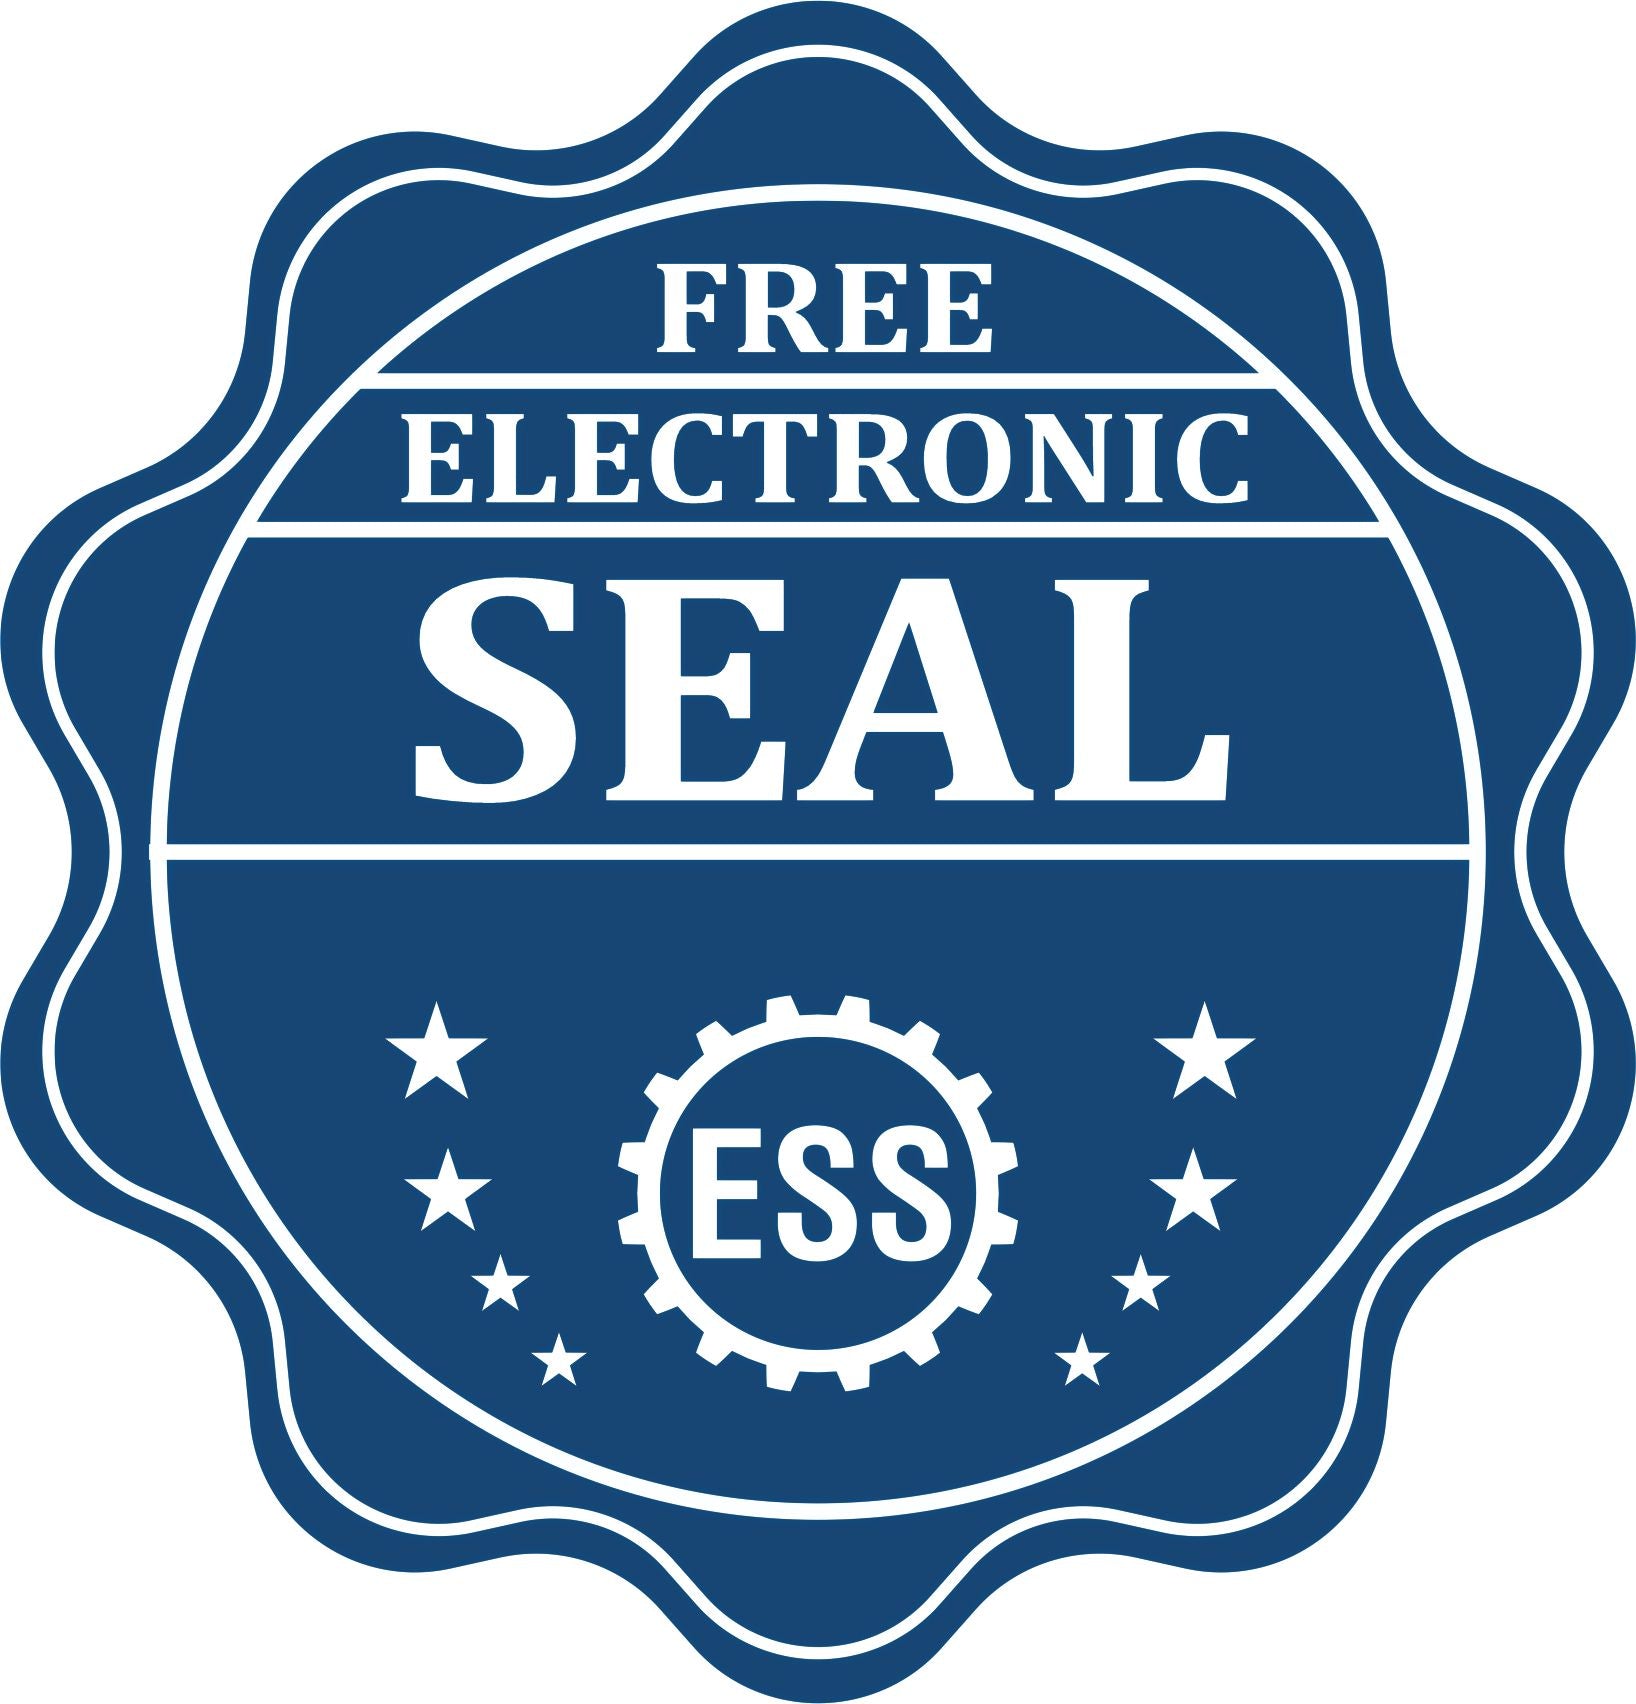 A badge showing a free electronic seal for the Self-Inking Michigan Landscape Architect Stamp with stars and the ESS gear on the emblem.